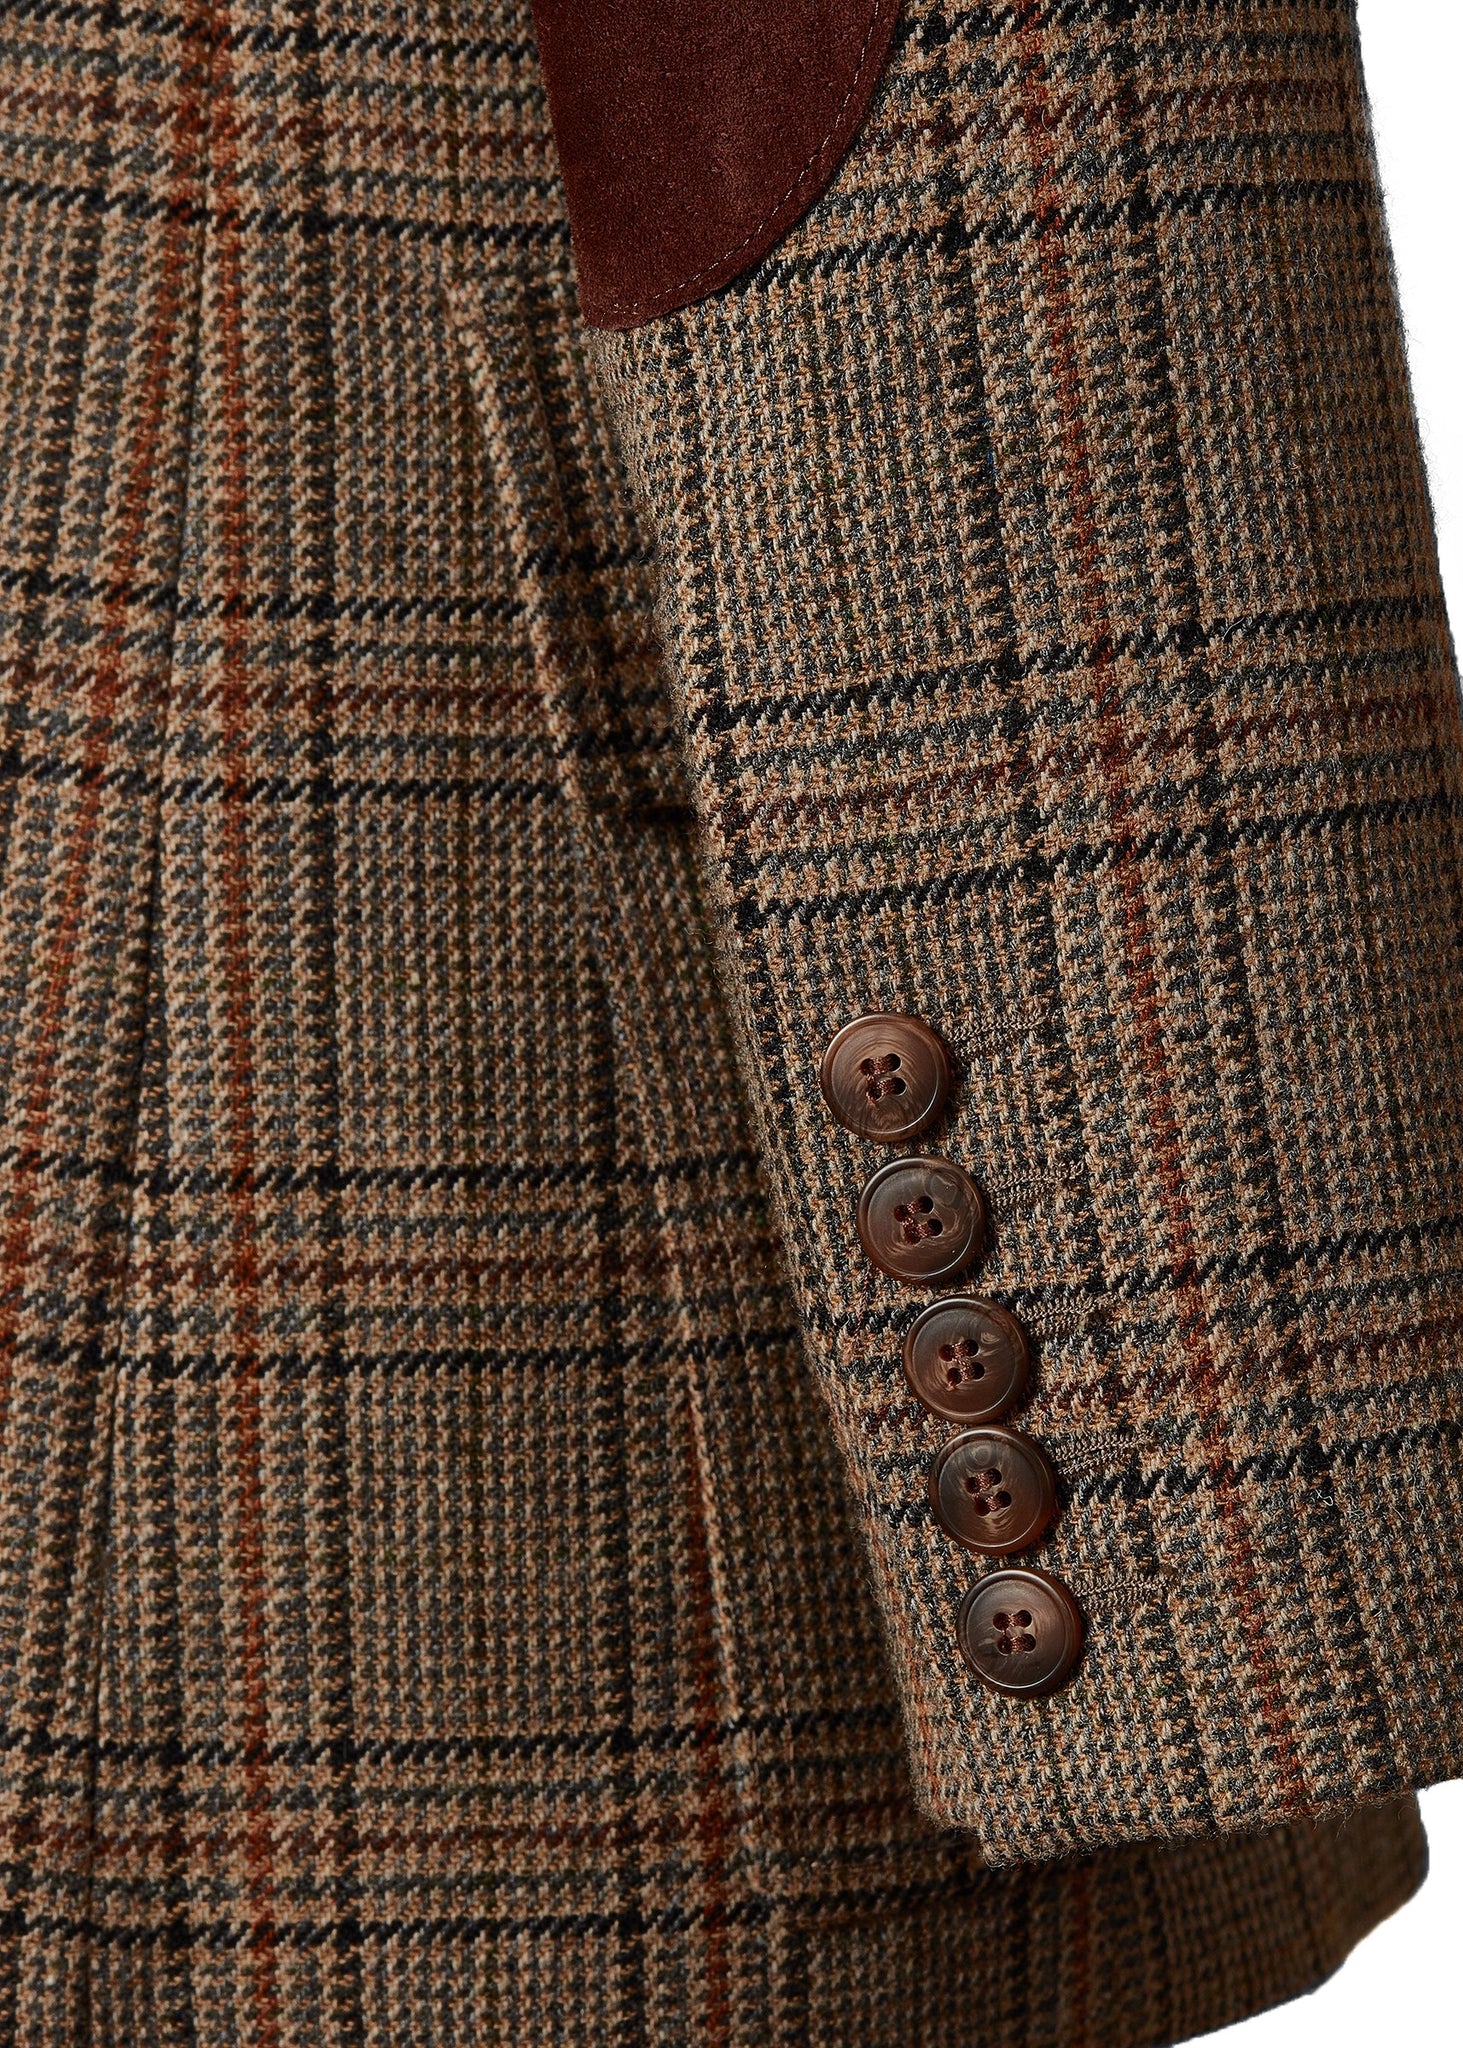 horn button cuff detail on womens classic slim fit single breasted blazer in brown and orange tweed with lower patch pockets with concealed button flap contrast brown suede shoulder gun patch with elbow patches and horn button finish on cuffs and front 